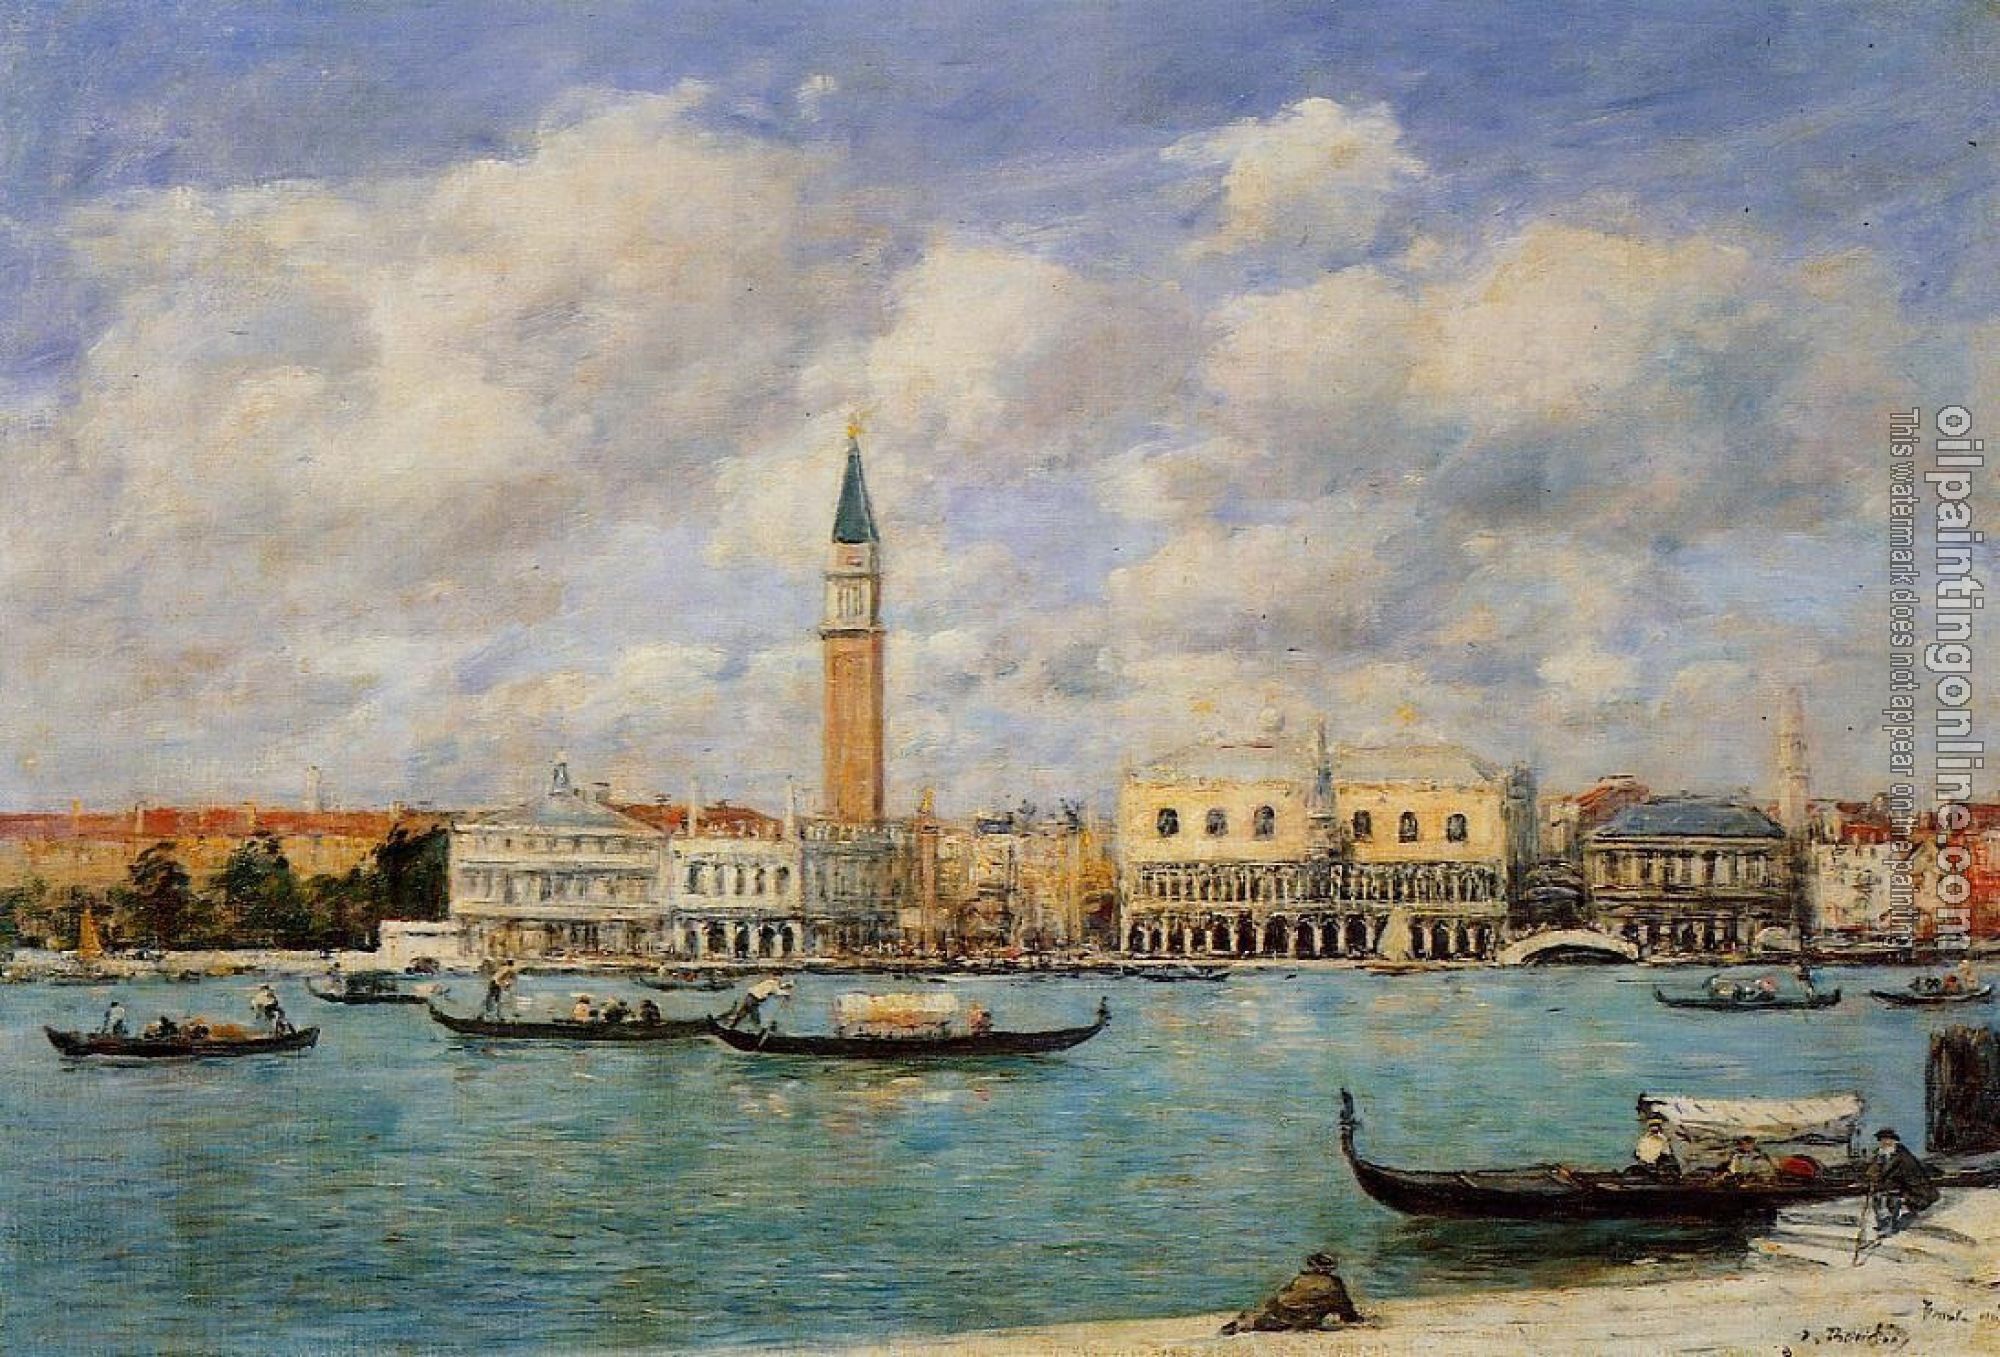 Boudin, Eugene - Venice, the Campanile, View of Canal San Marco from San Gior